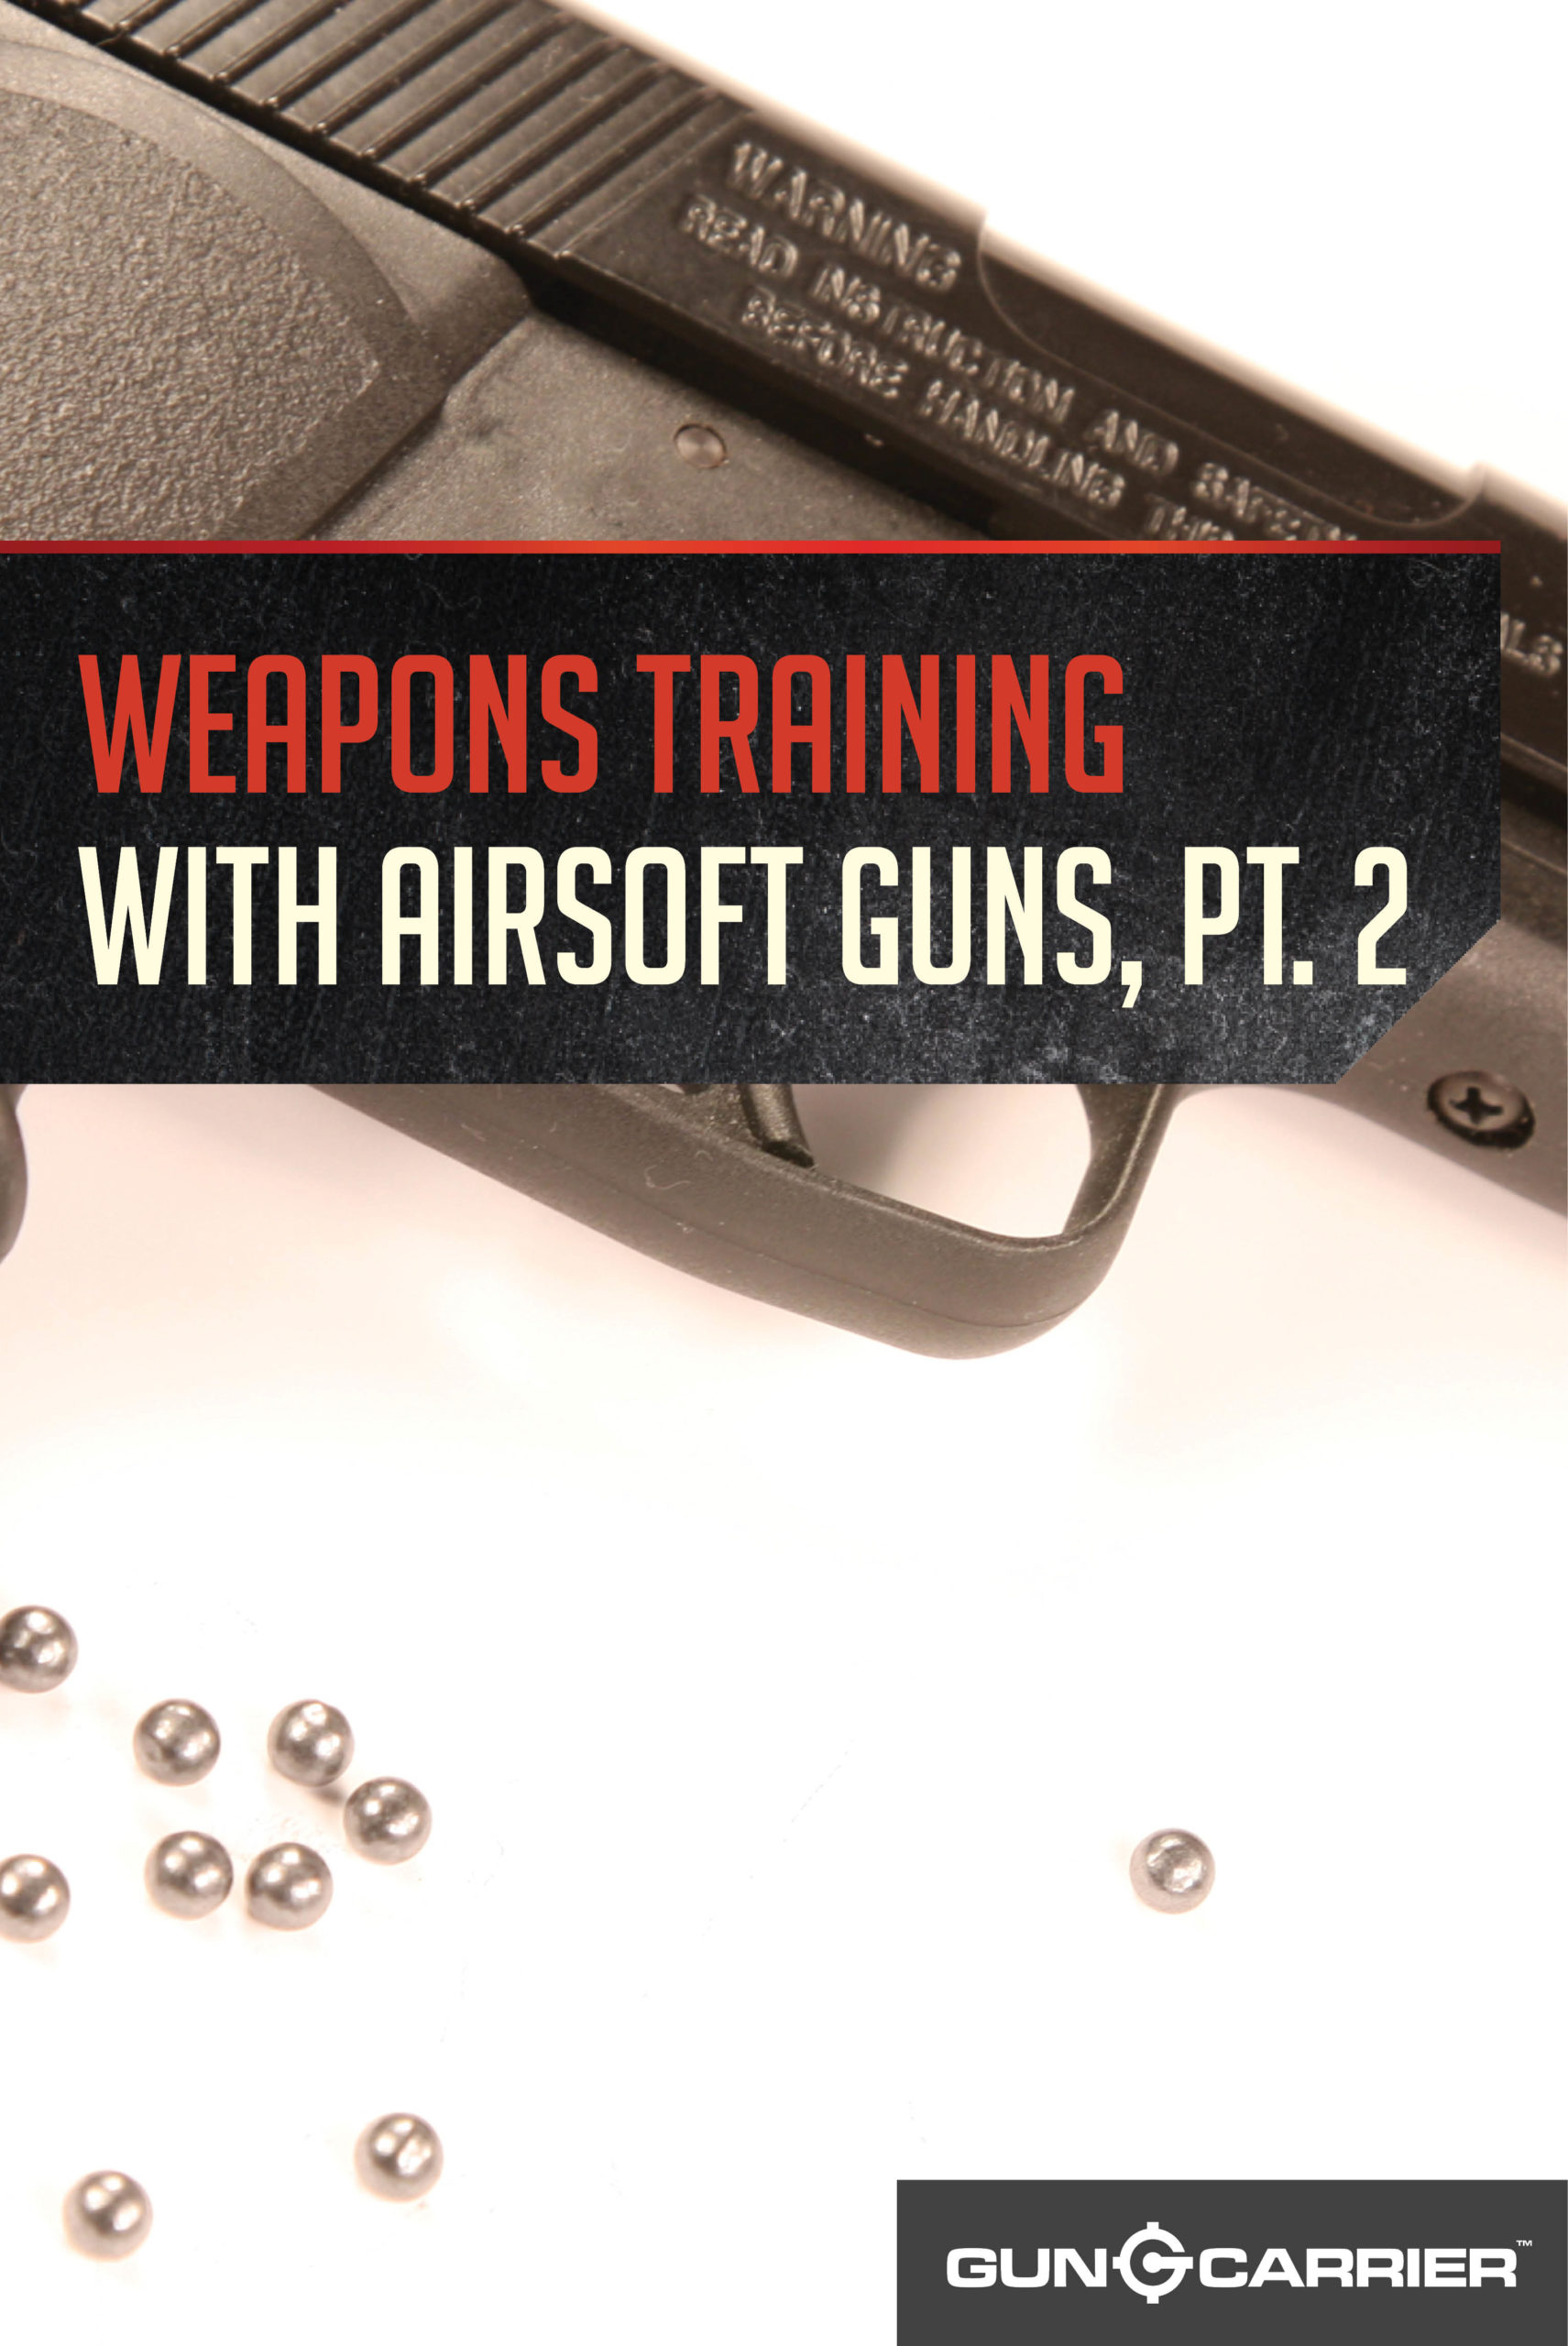 Defensive Weapon Training: The Airsoft Alternative Part II by Gun Carrier at https://guncarrier.com/airsoft-alternative-part-ii/